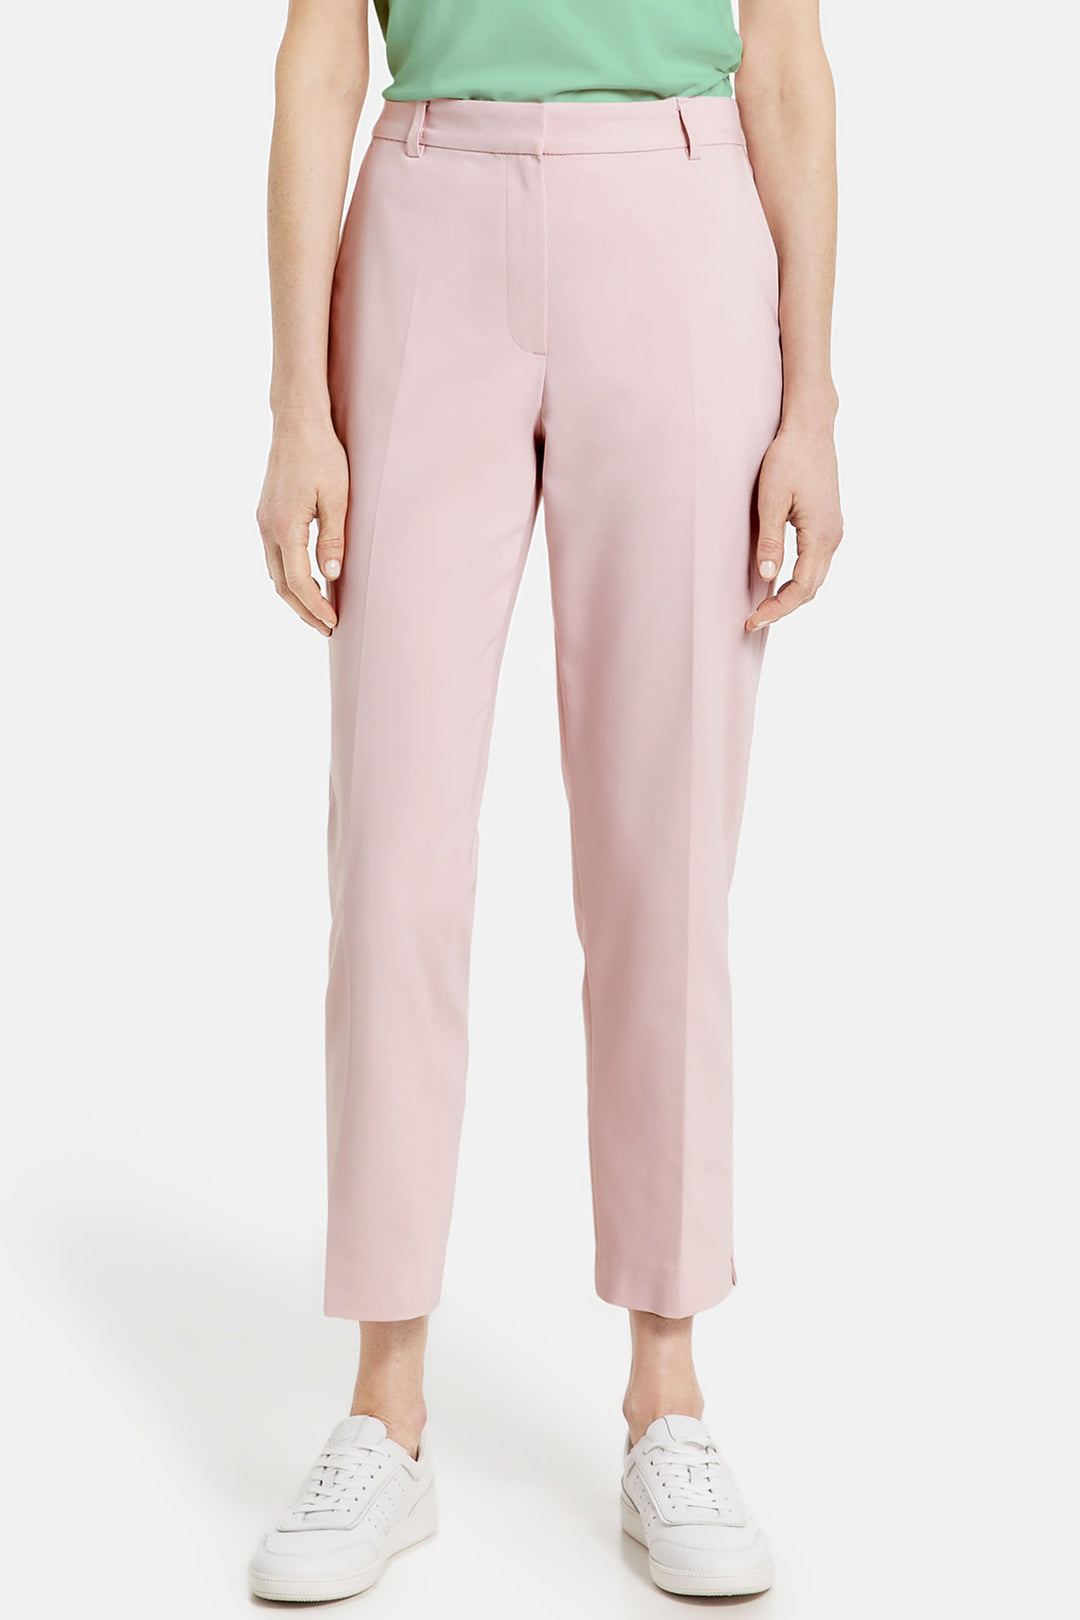 Gerry Weber 320006 Lotus Pink Trousers - Experience Boutique